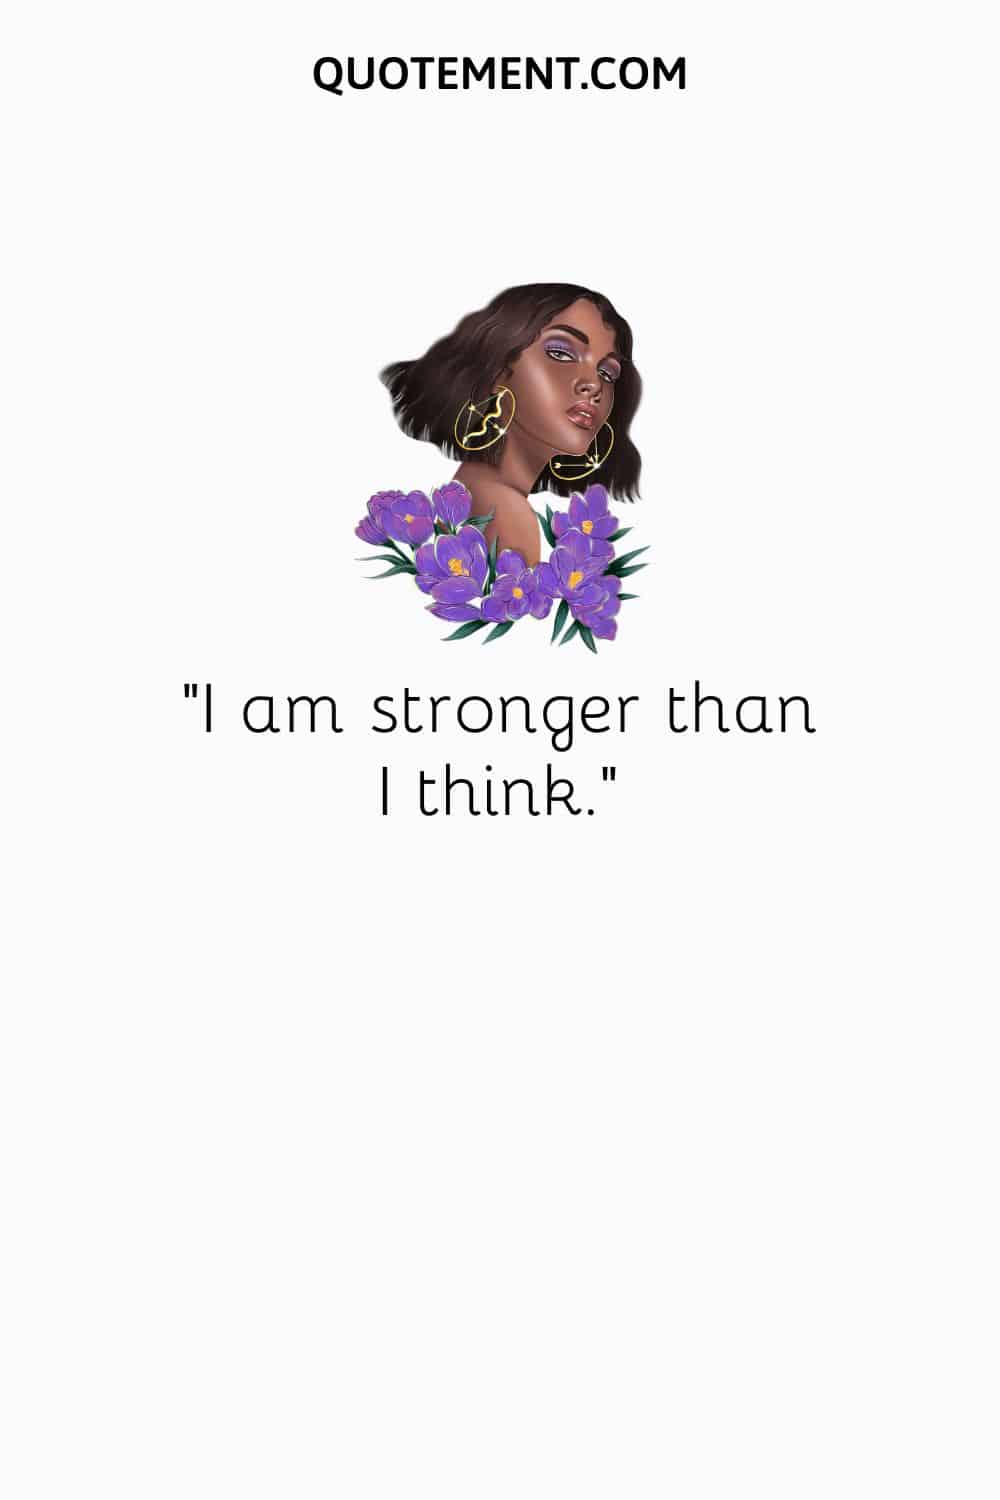 black woman and violet flowers image representing self confidence positive affirmation